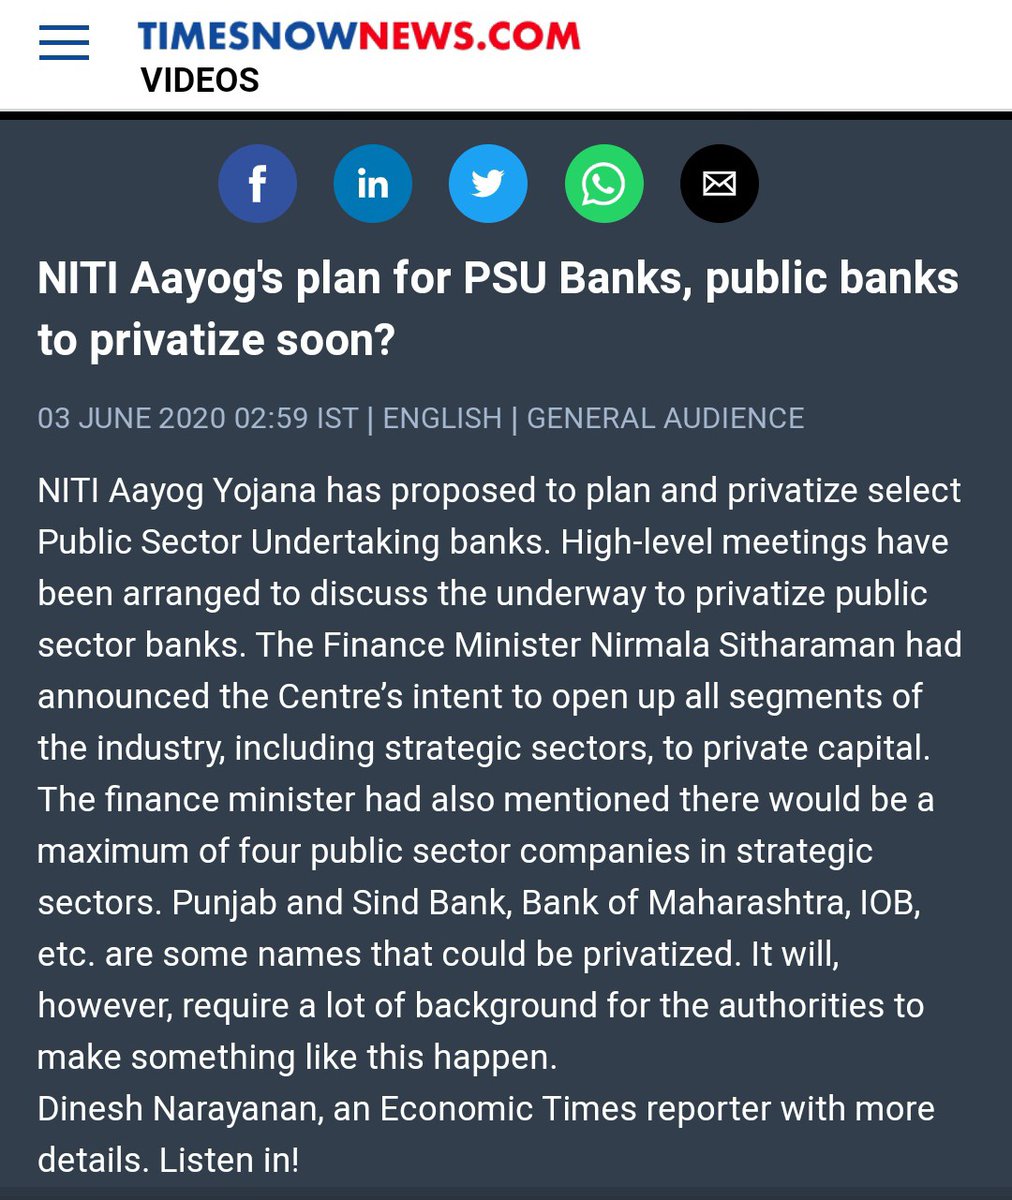 Public Banks done all #SocialBanking & Govt Schemes in last 6 yrs. 👉PMGKY 👉JanDhan 👉MUDRA 👉DBT 👉Aadhaar 👉Pension 👉FBY 👉APY 👉KCC 👉PMJJY 👉PMSBY But in Media Reports @NITIAayog is initiated for Privatization of Public Banks. #ModiBetrayedIndia #StopPrivatization